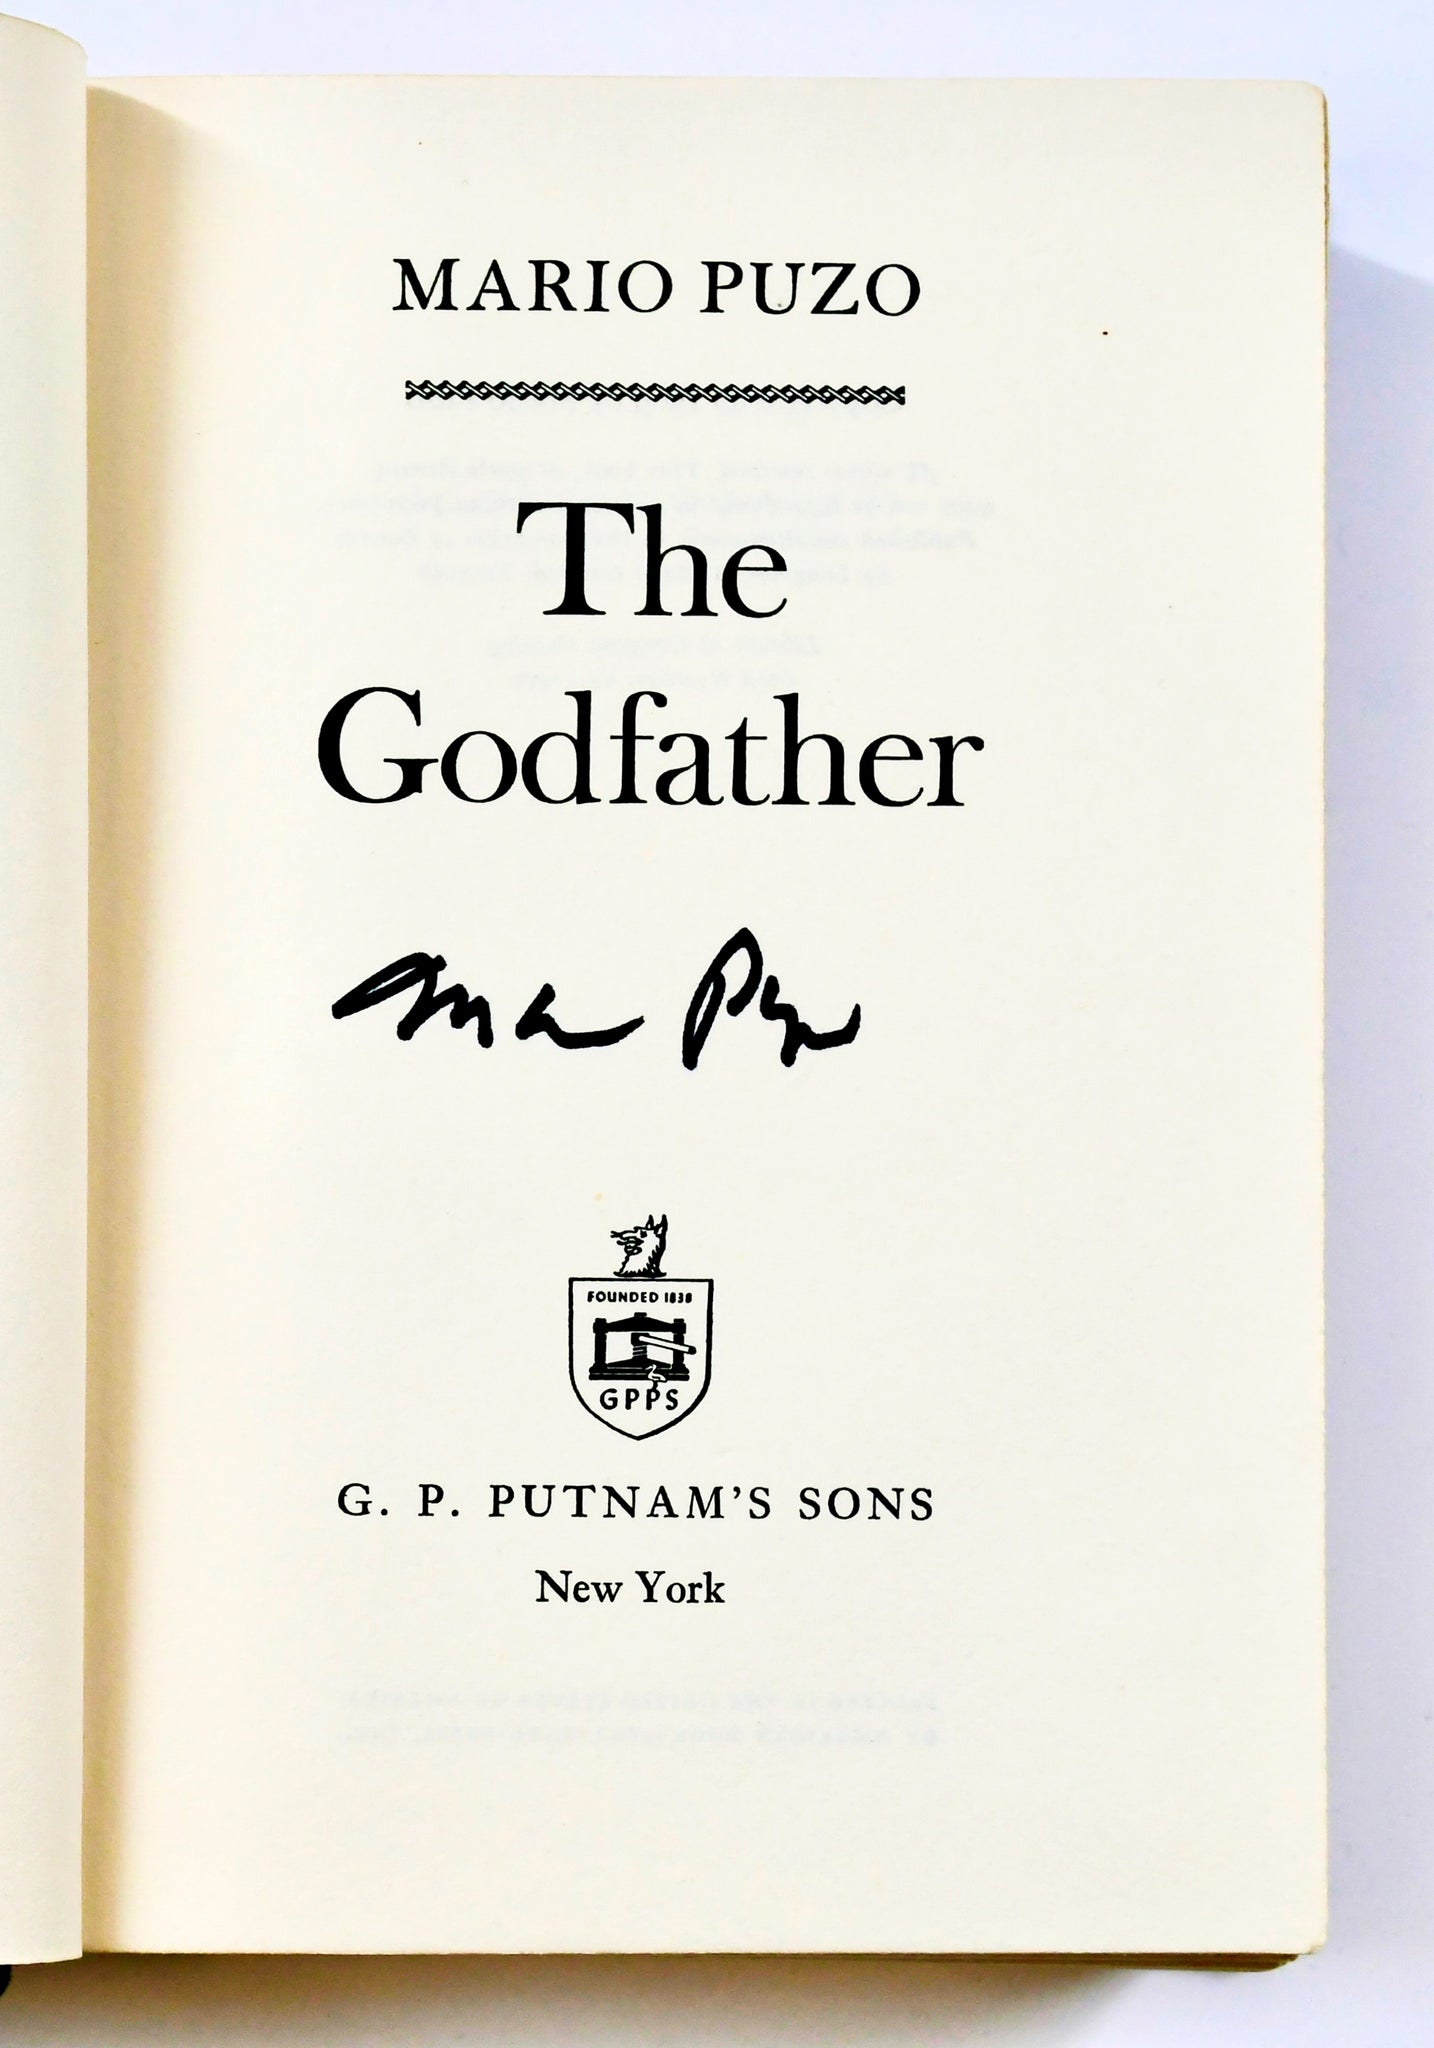 A One-of-a-Kind First Edition of Mario Puzo's The Godfather, signed by him, Francis Ford Coppola, Al Pacino, Diane Keaton, Robert Evans, and Robert Towne